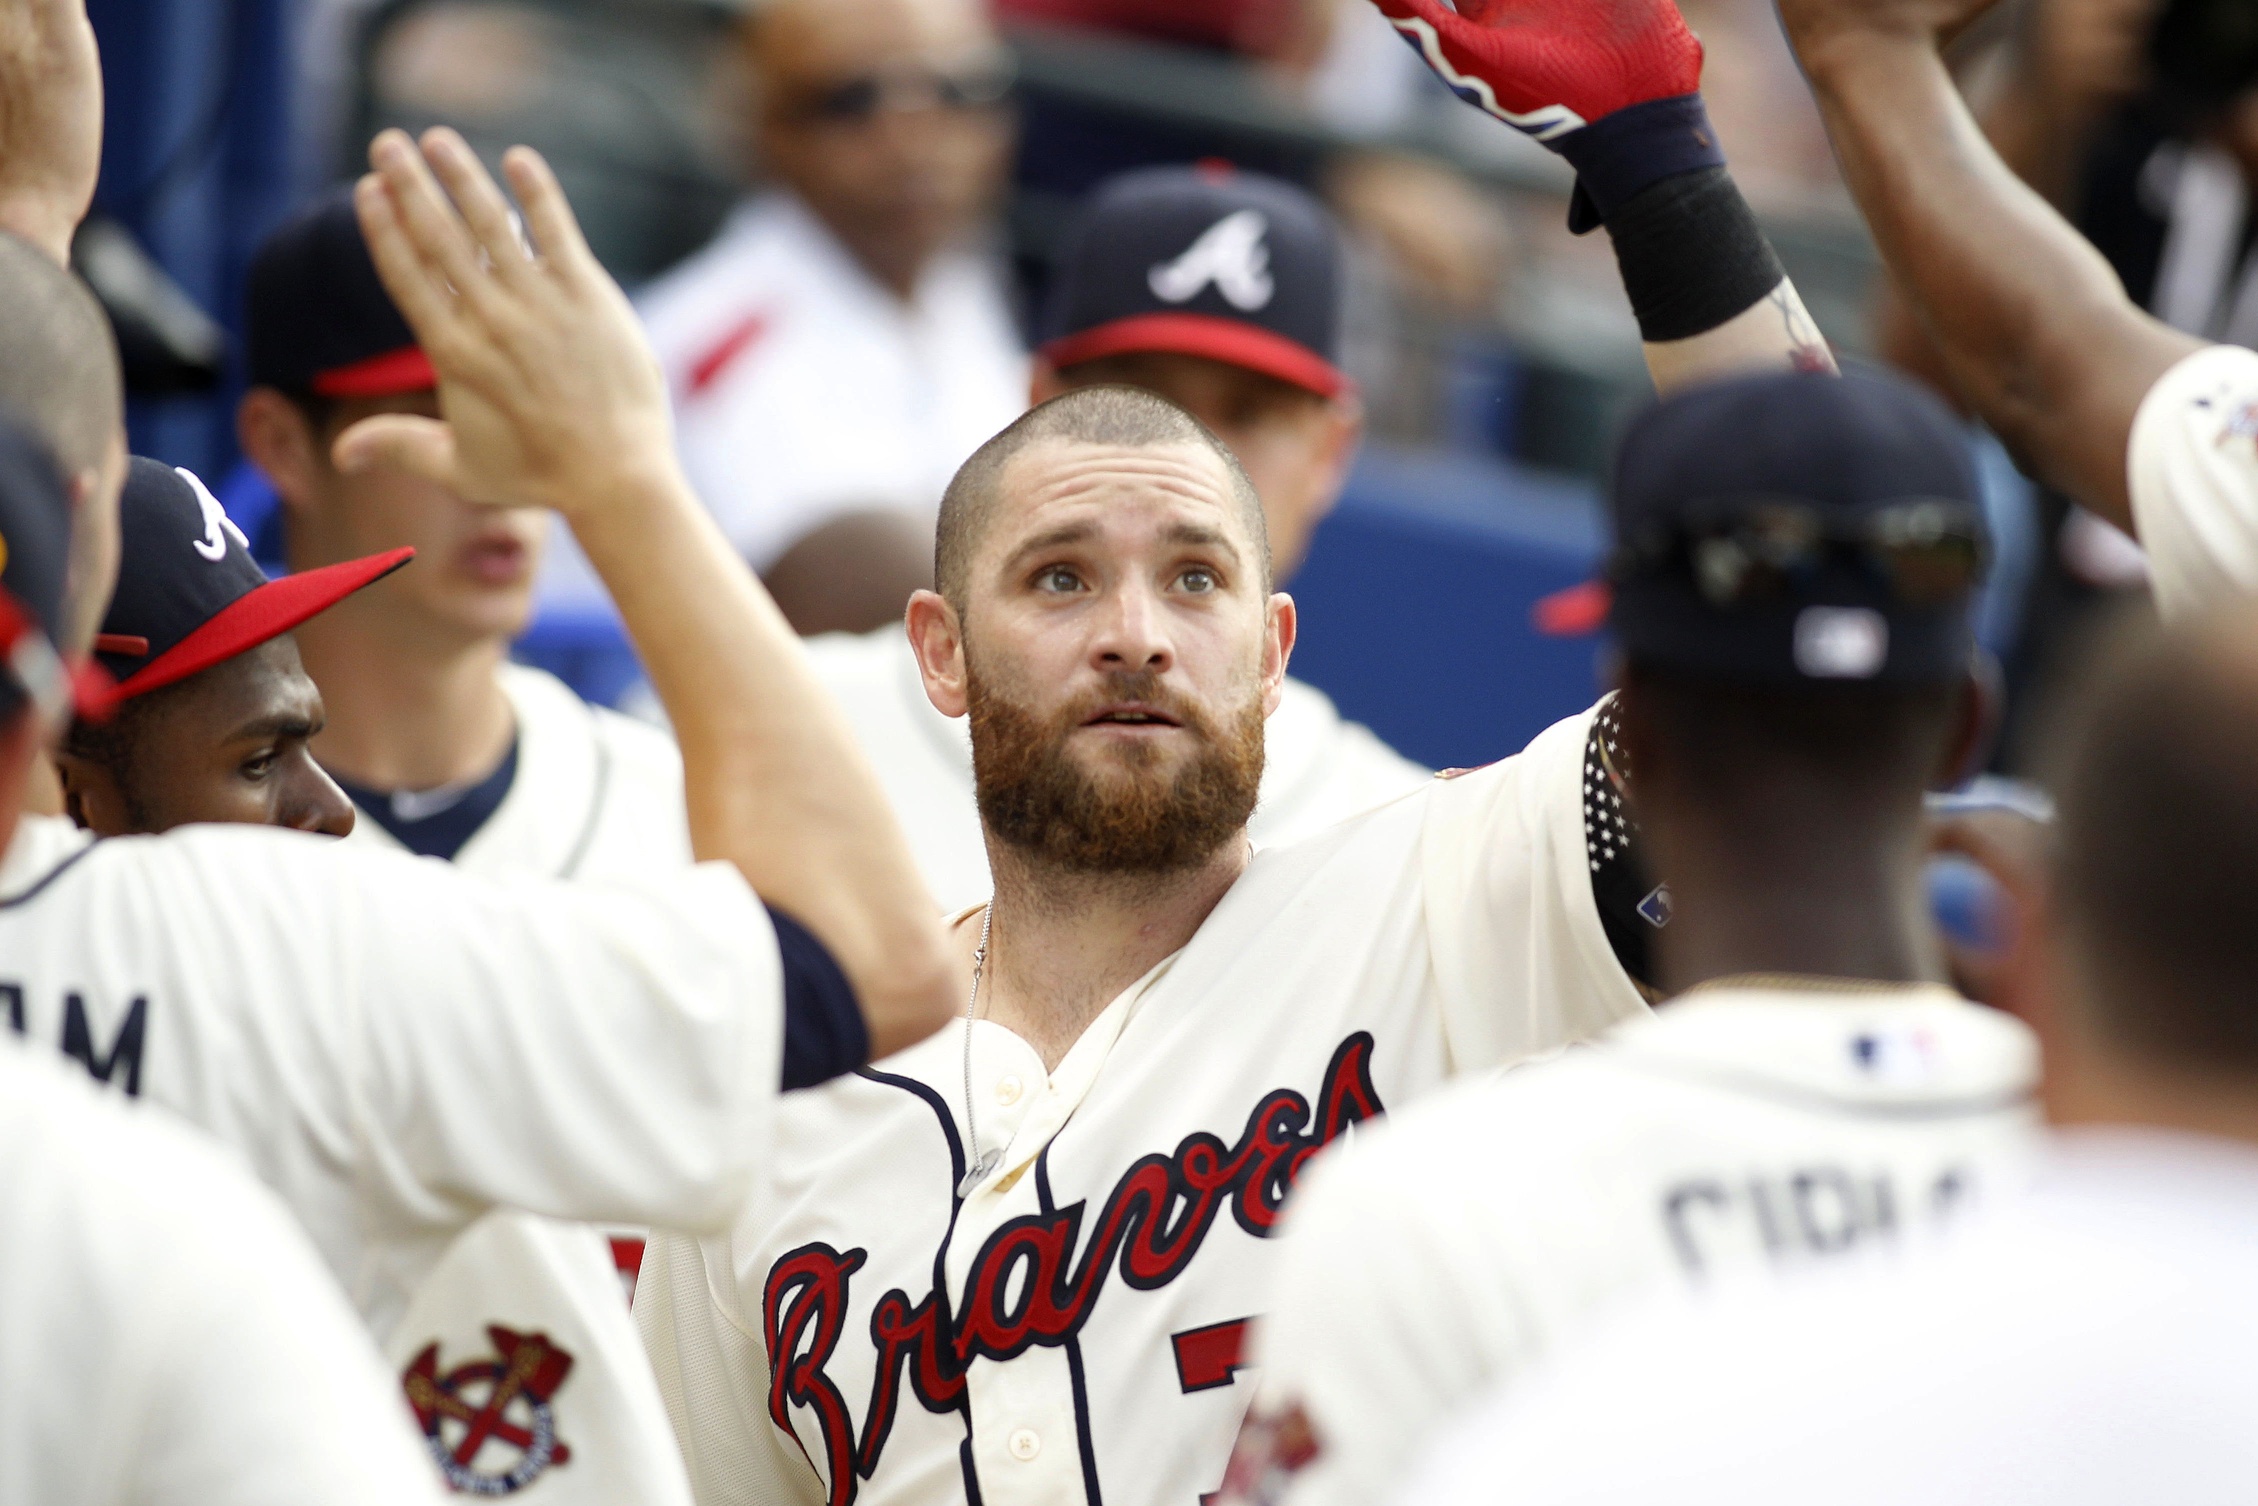 WATCH: Outfielder Jonny Gomes pitched for Braves vs. Yankees2258 x 1506